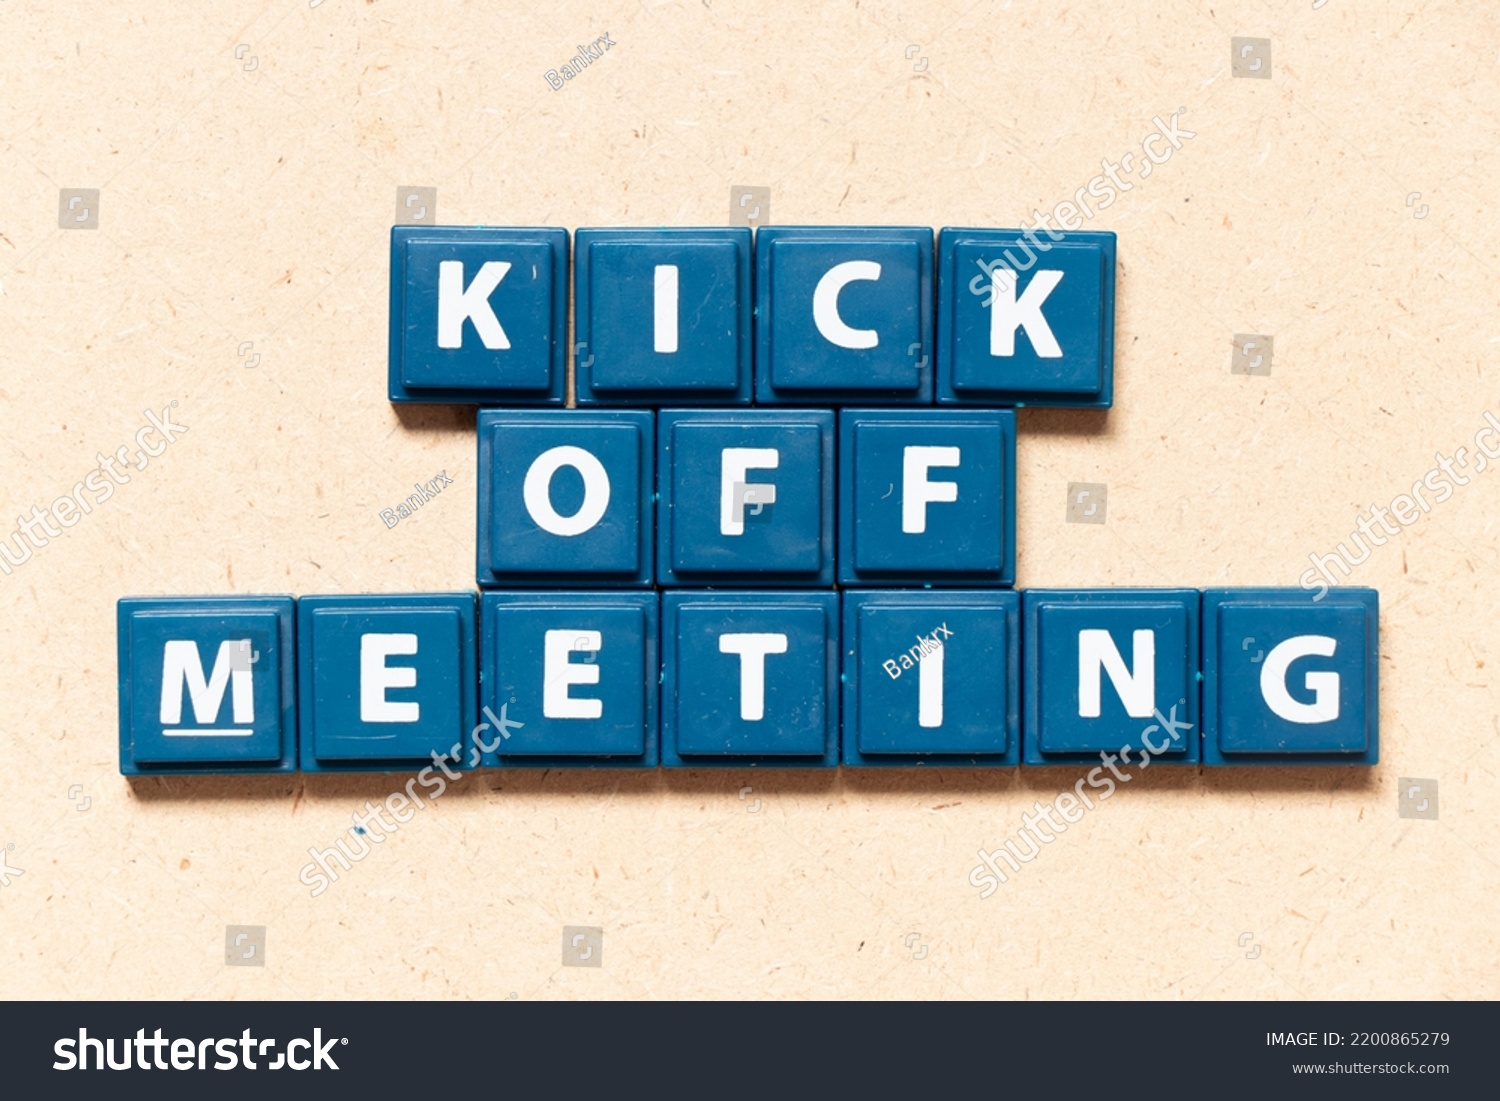 Tile letter in english word kick off meeting on wood background #2200865279